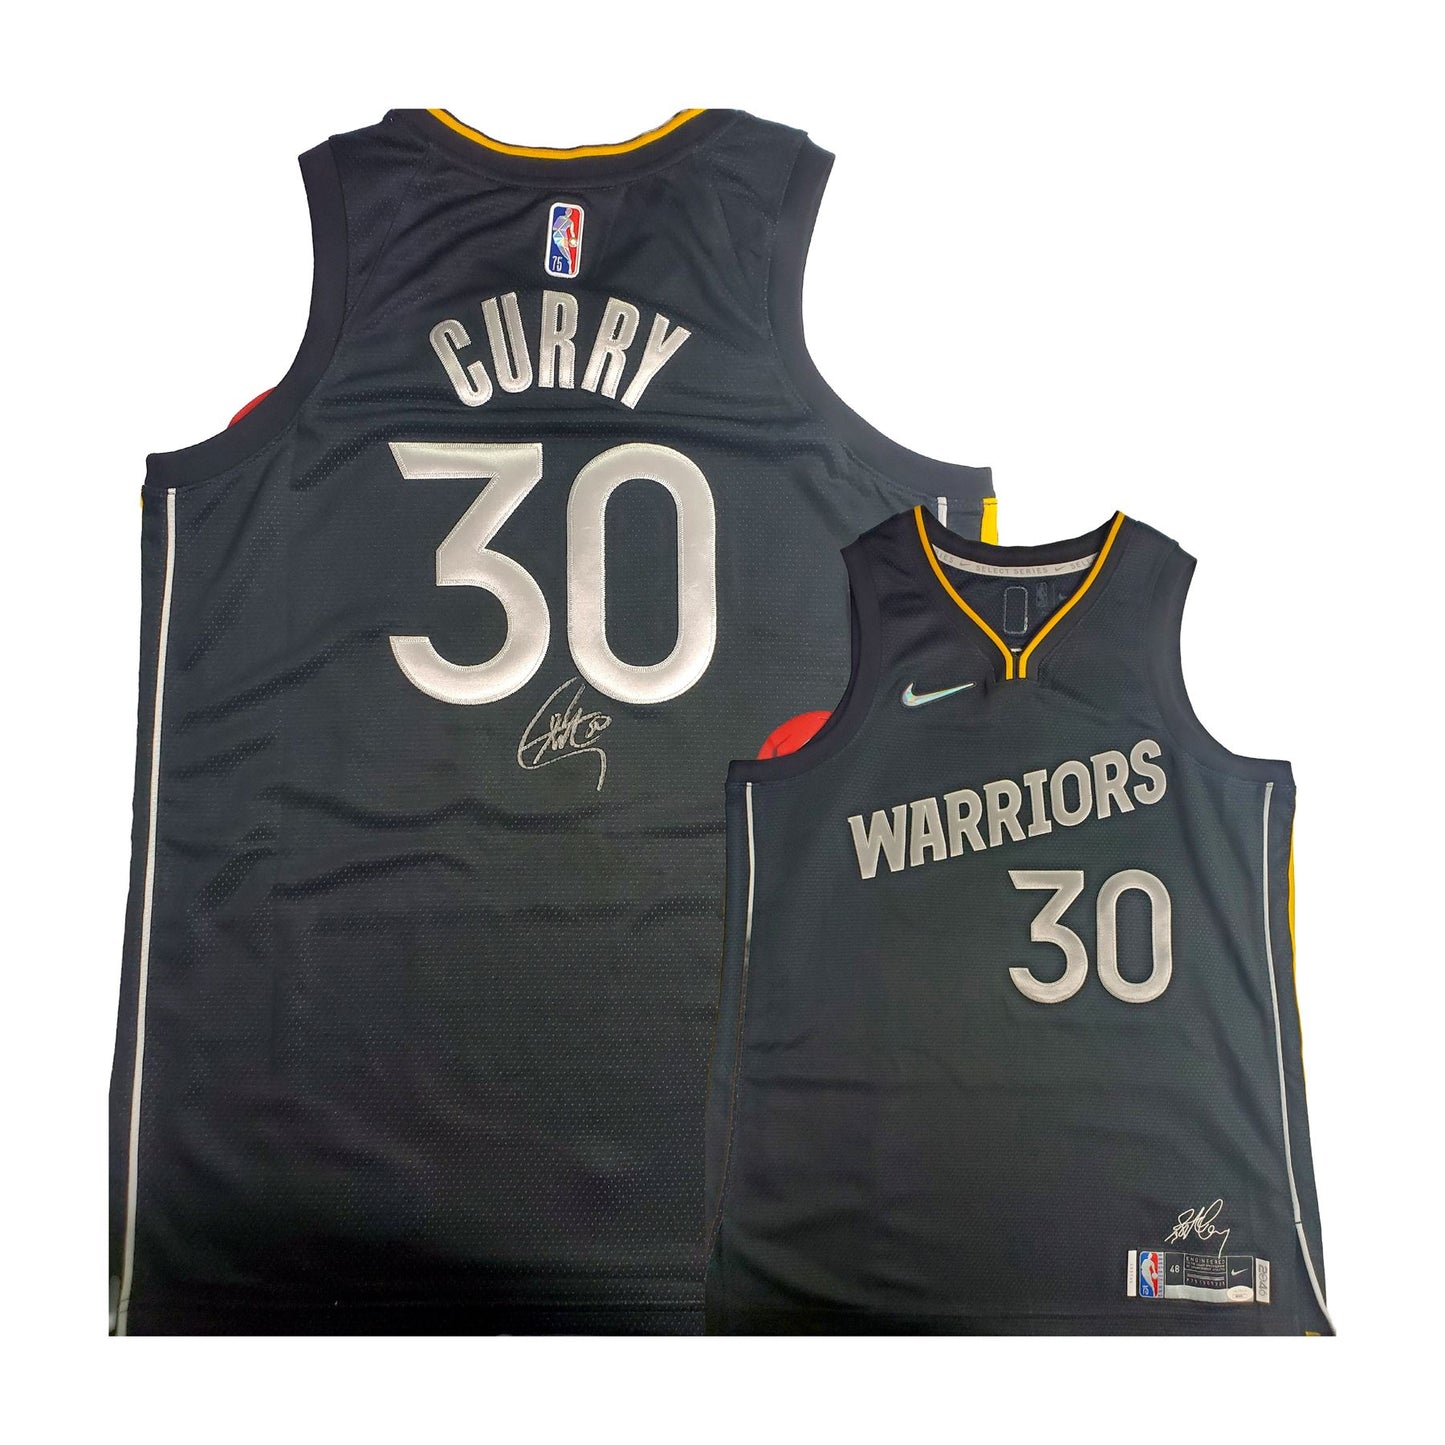 Steph Curry signed Black 75th Anniversary Warriors Jersey-JSA